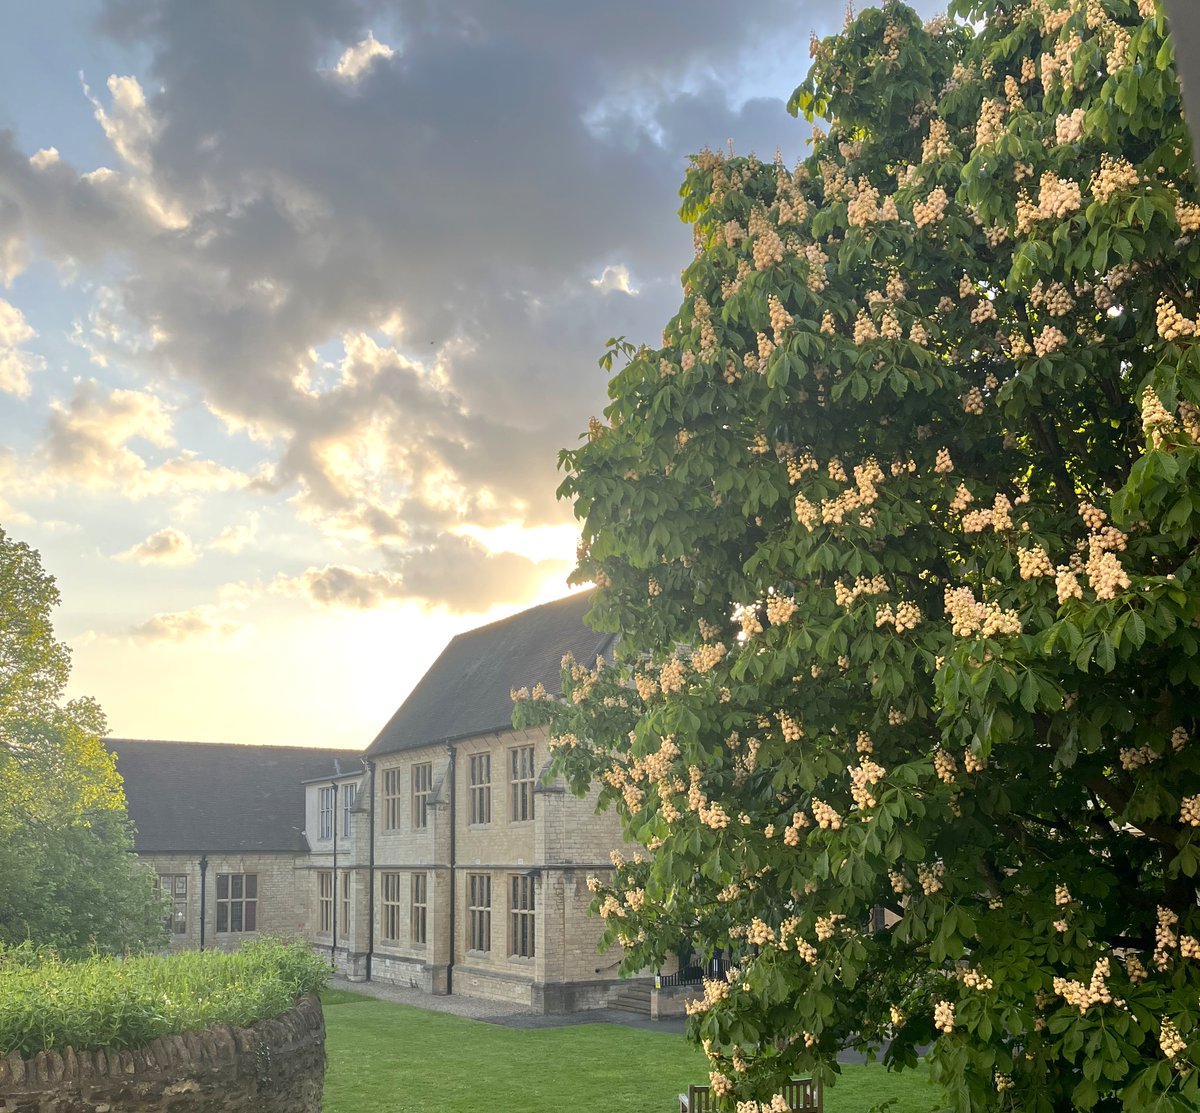 'Yet still the unresting castles thresh 
In full grown thickness every May'                                                        
                         (Larkin)  

A horse chestnut lit up with candles at sunset. 
(🕯️is a lovely traditional name for their flowers.)
#Oxford